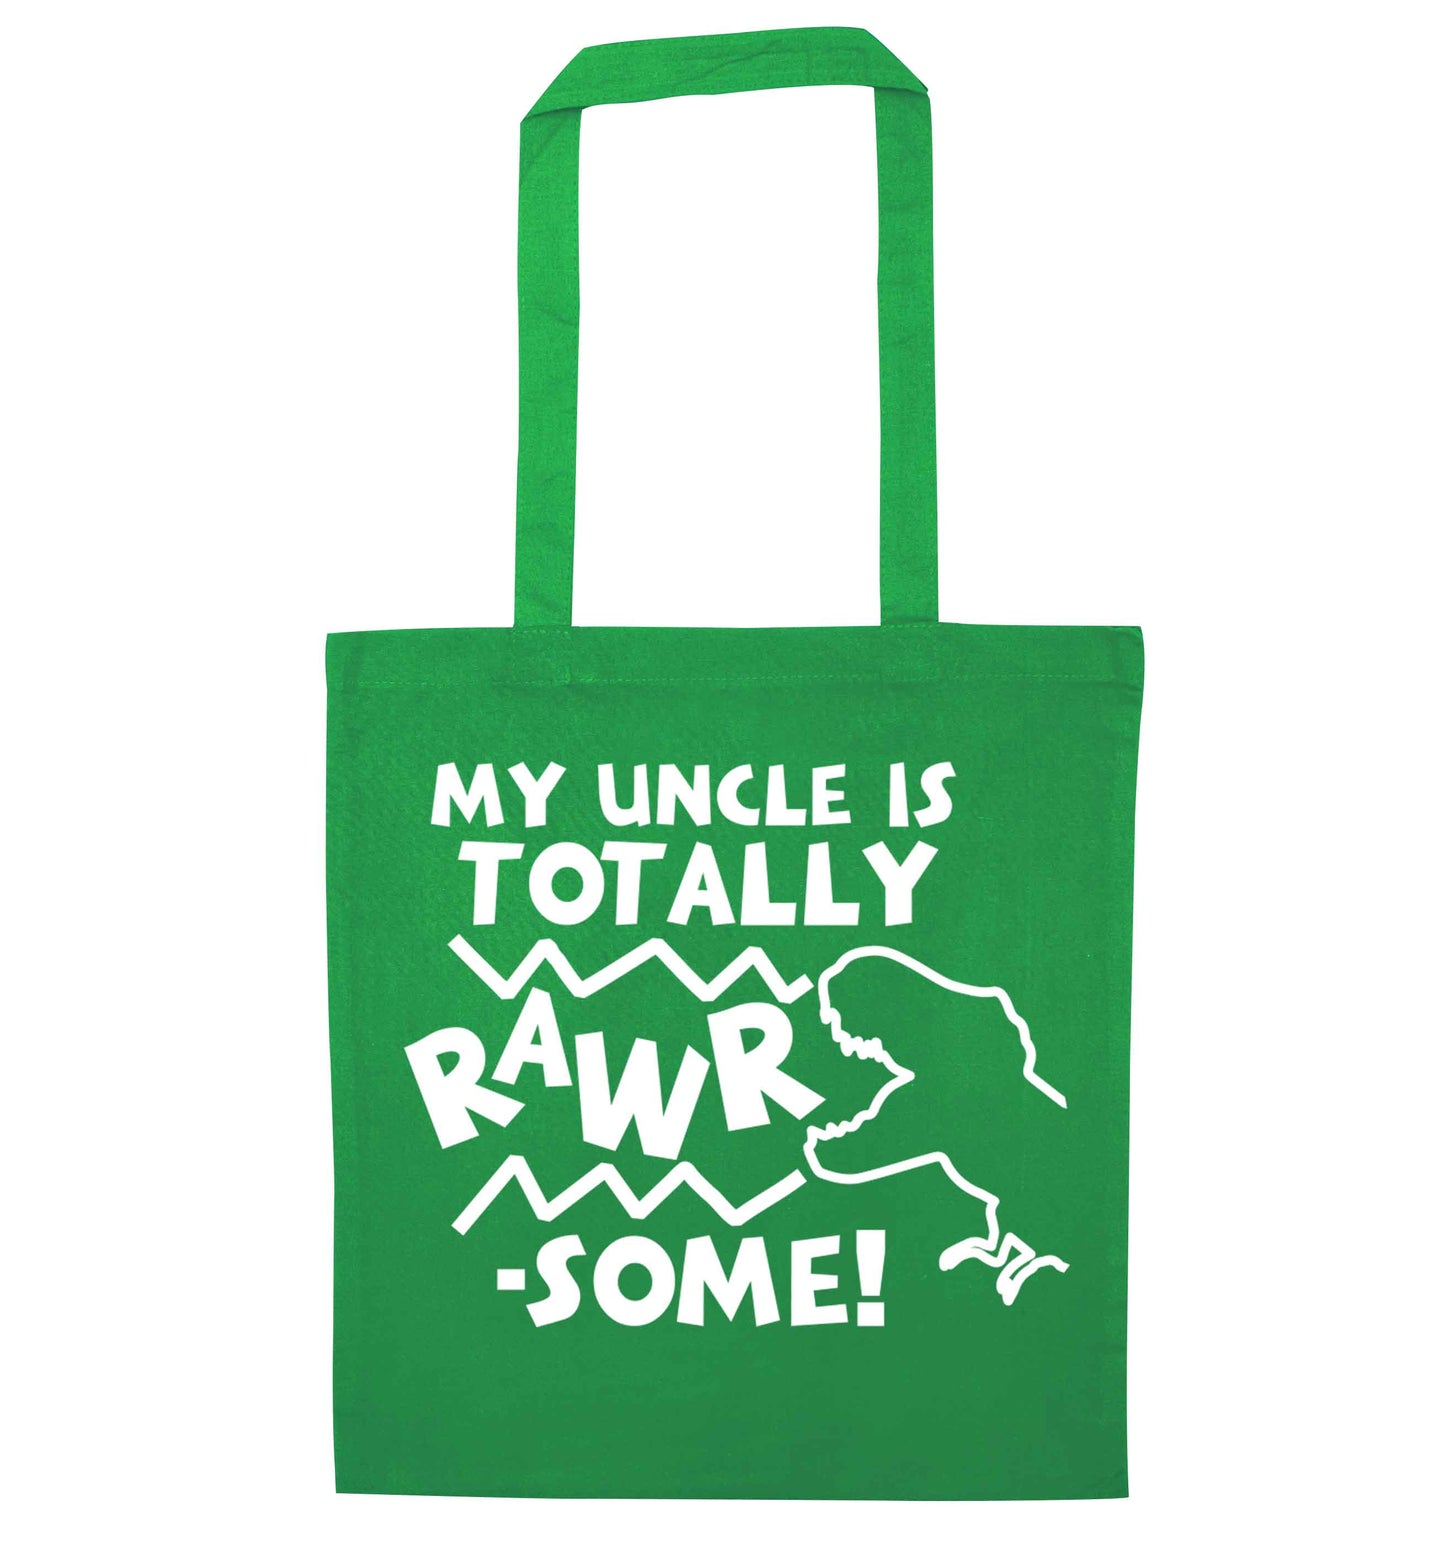 My uncle is totally rawrsome green tote bag